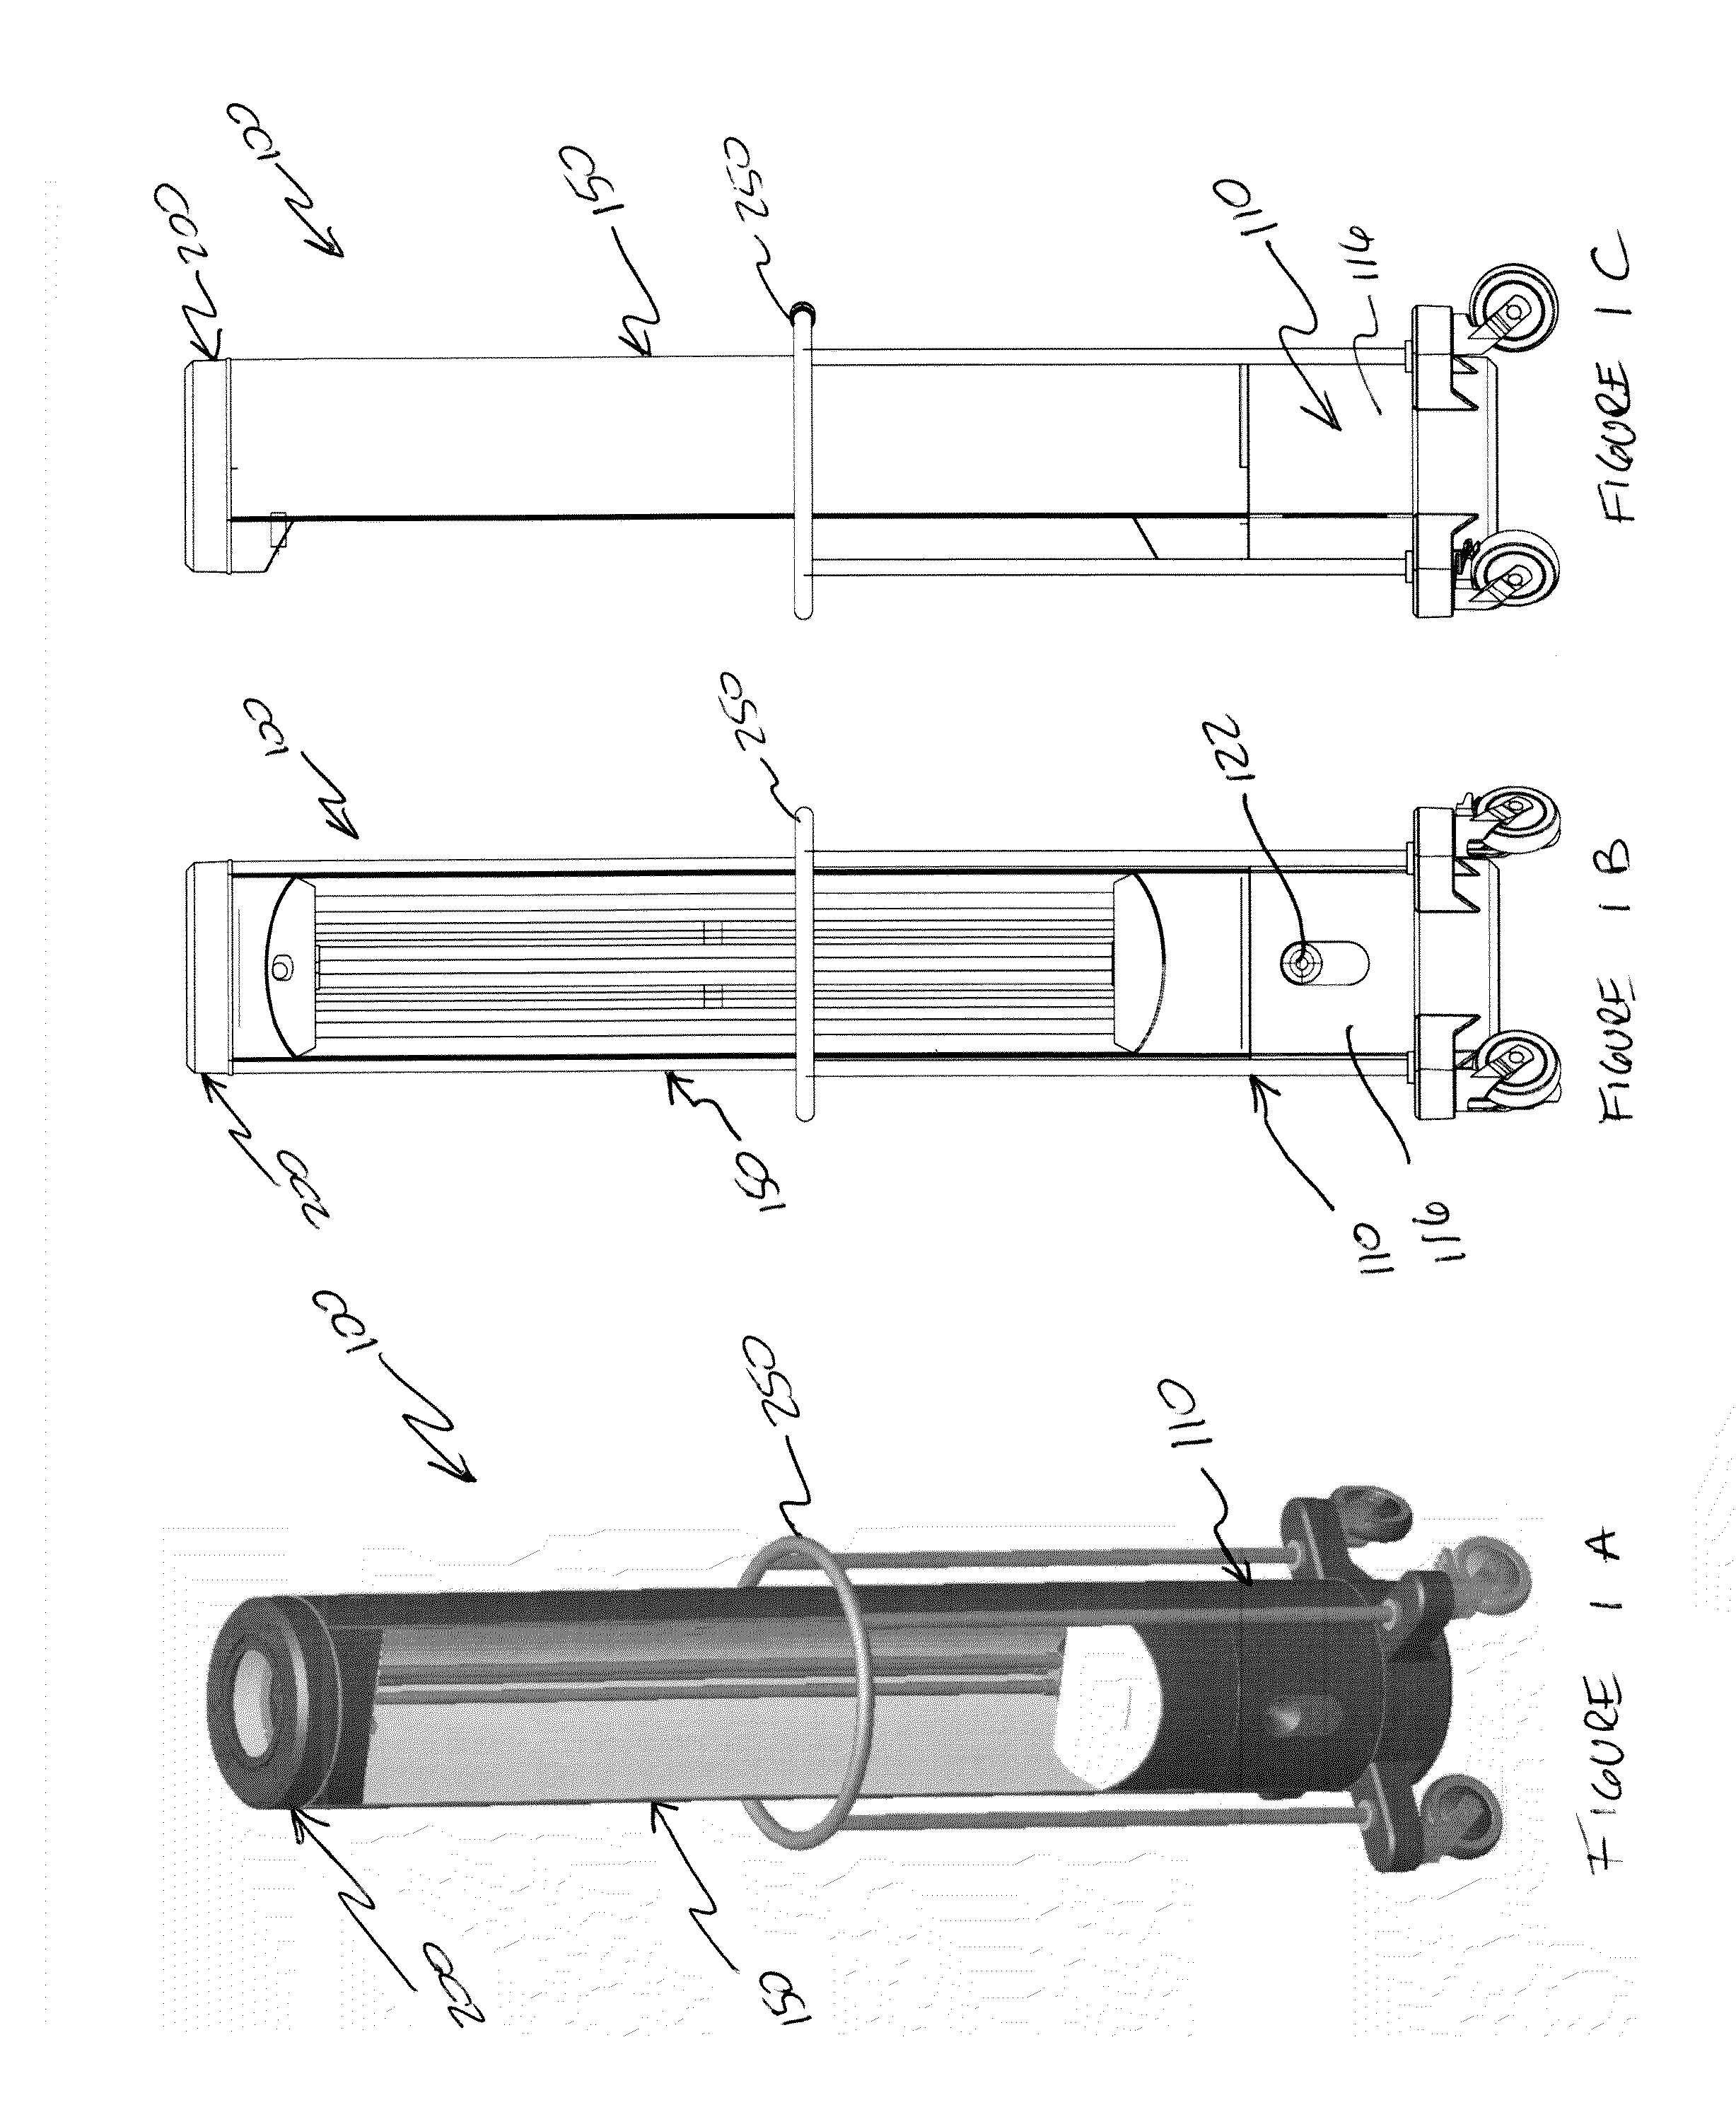 Hard Surface Disinfection System And Method